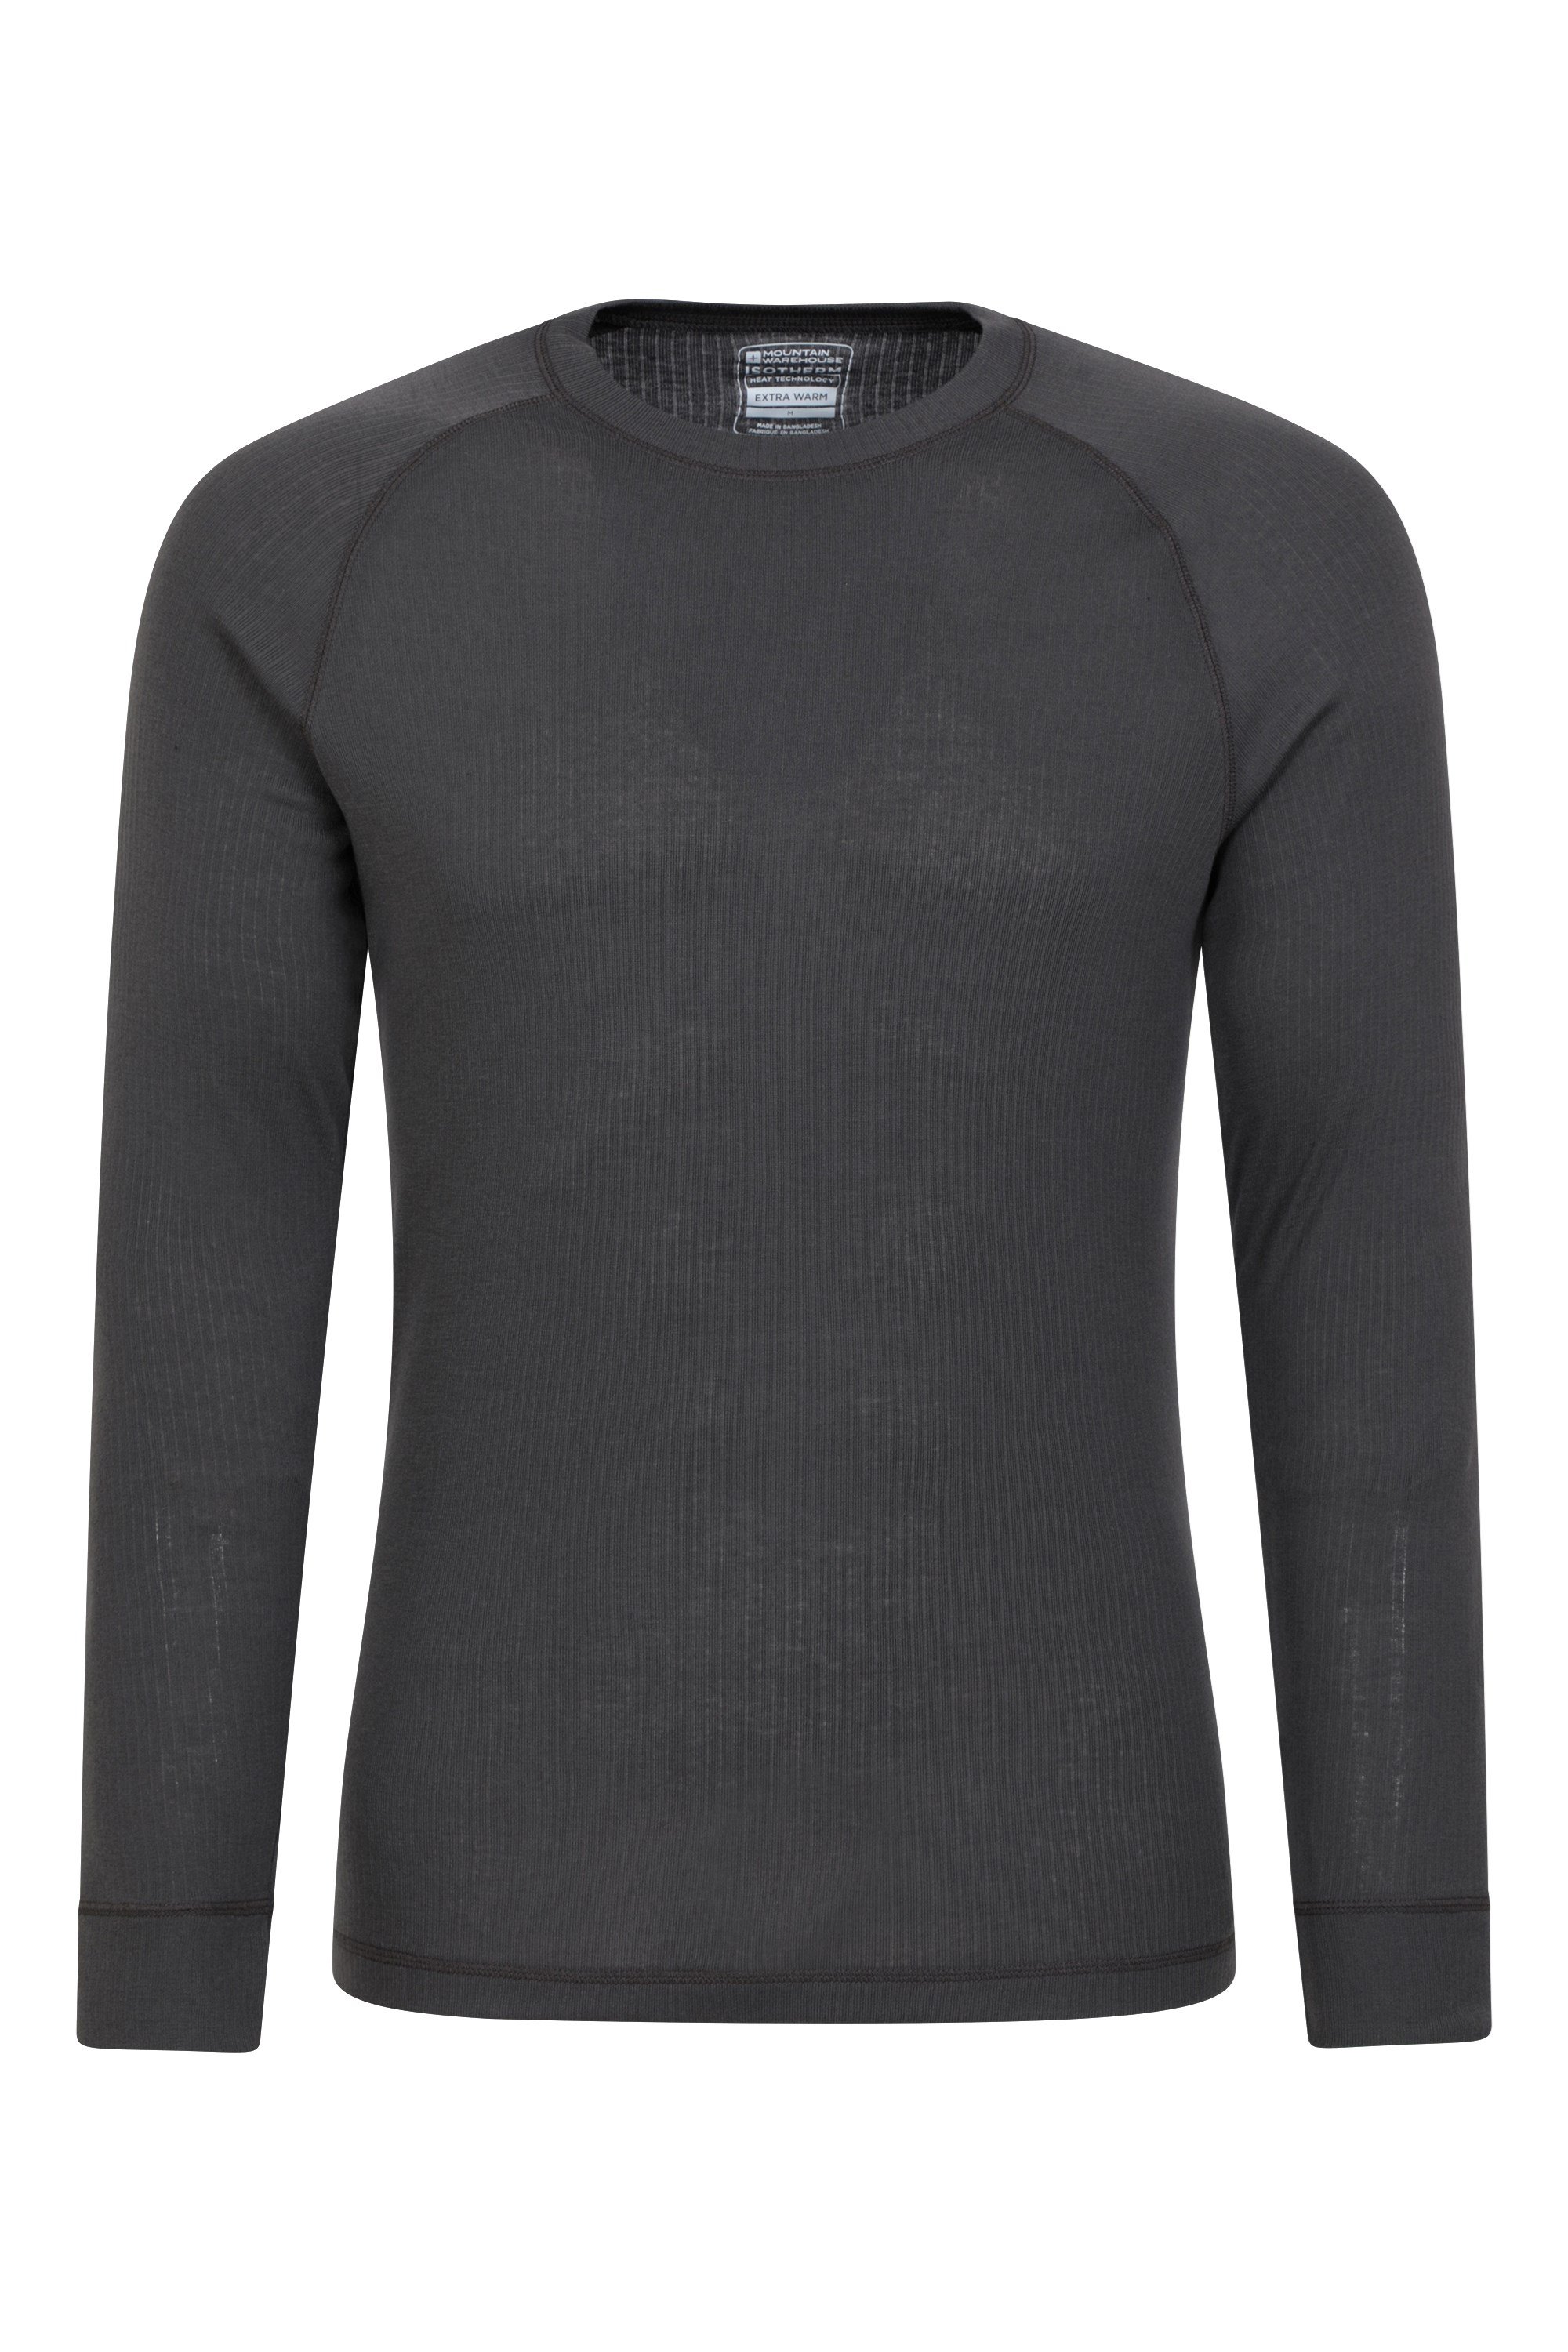 Palm Mens Invisible Seamless Long Sleeve Round Neck Thermal Top Base L -  British Thermals